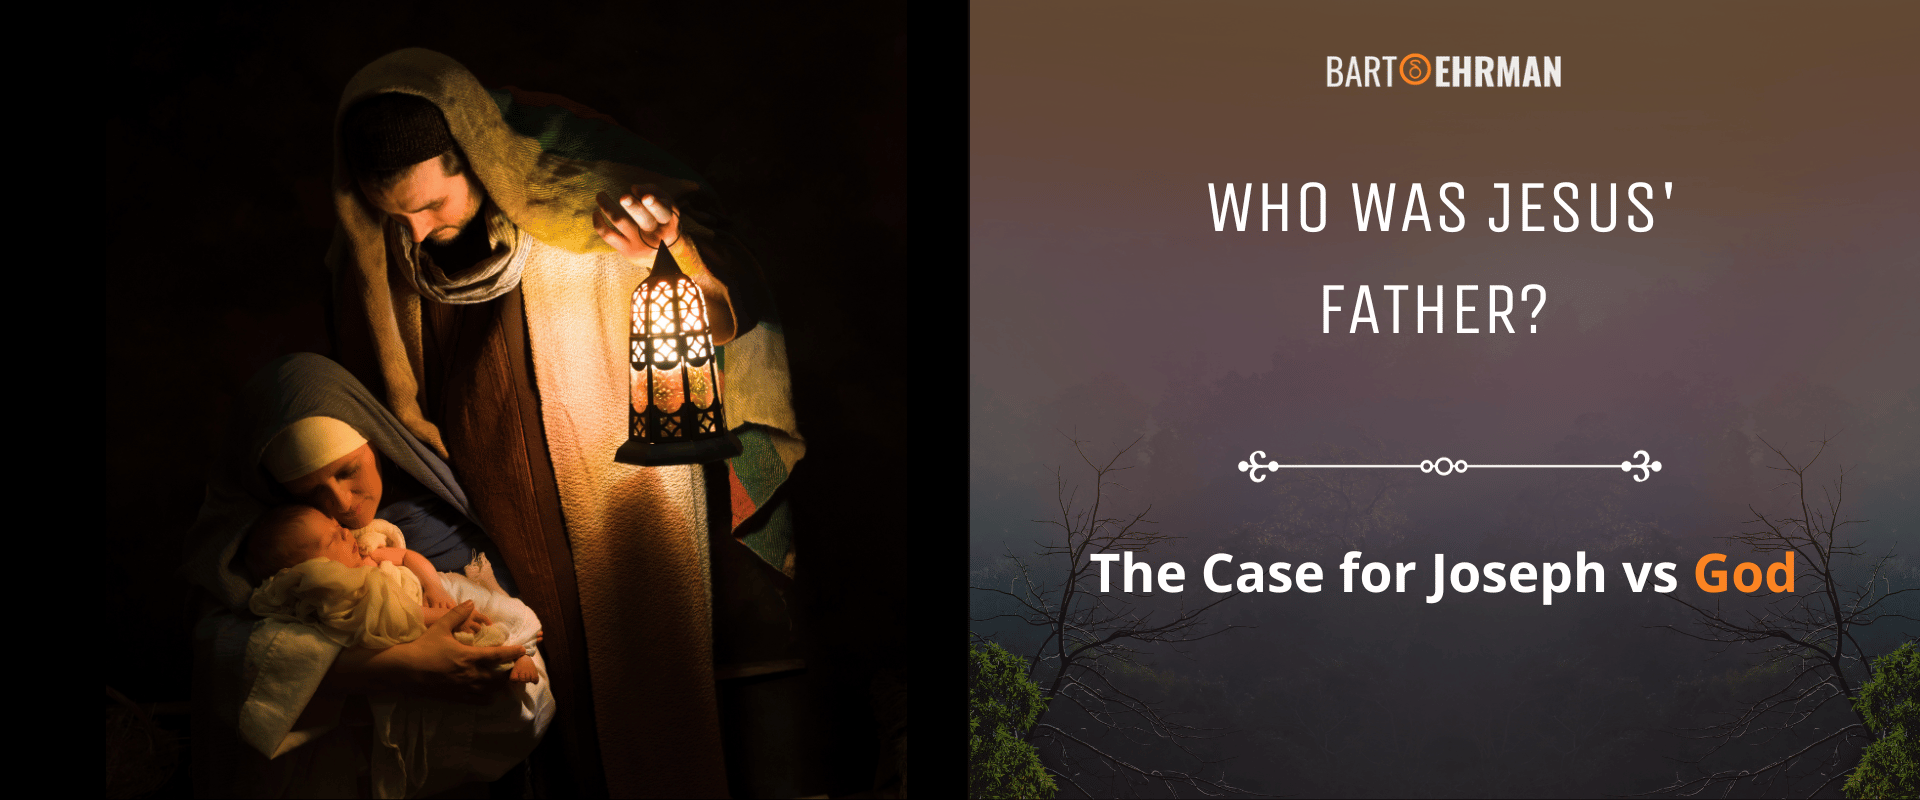 Who Was Jesus' Father - The Case for Joseph vs God